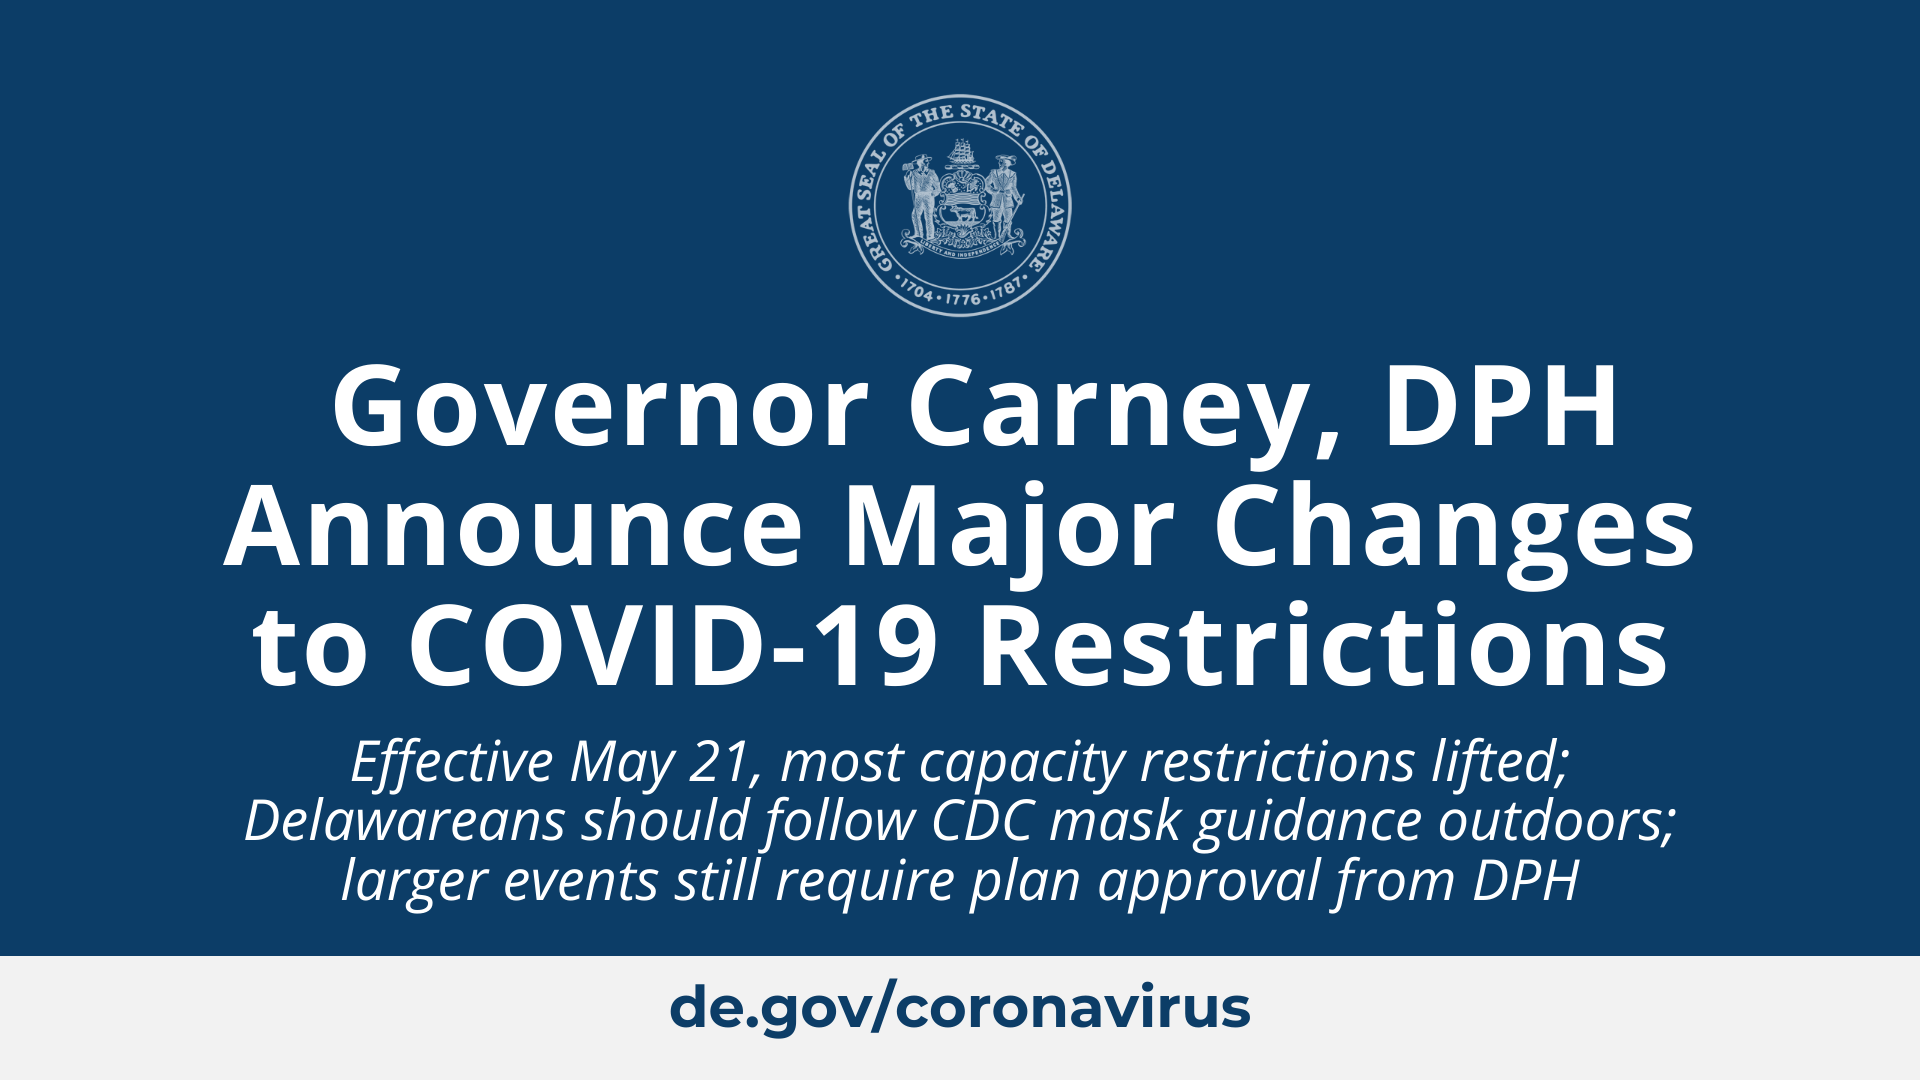 Governor Carney Dph Announce Major Changes To Covid 19 Restrictions State Of Delaware News